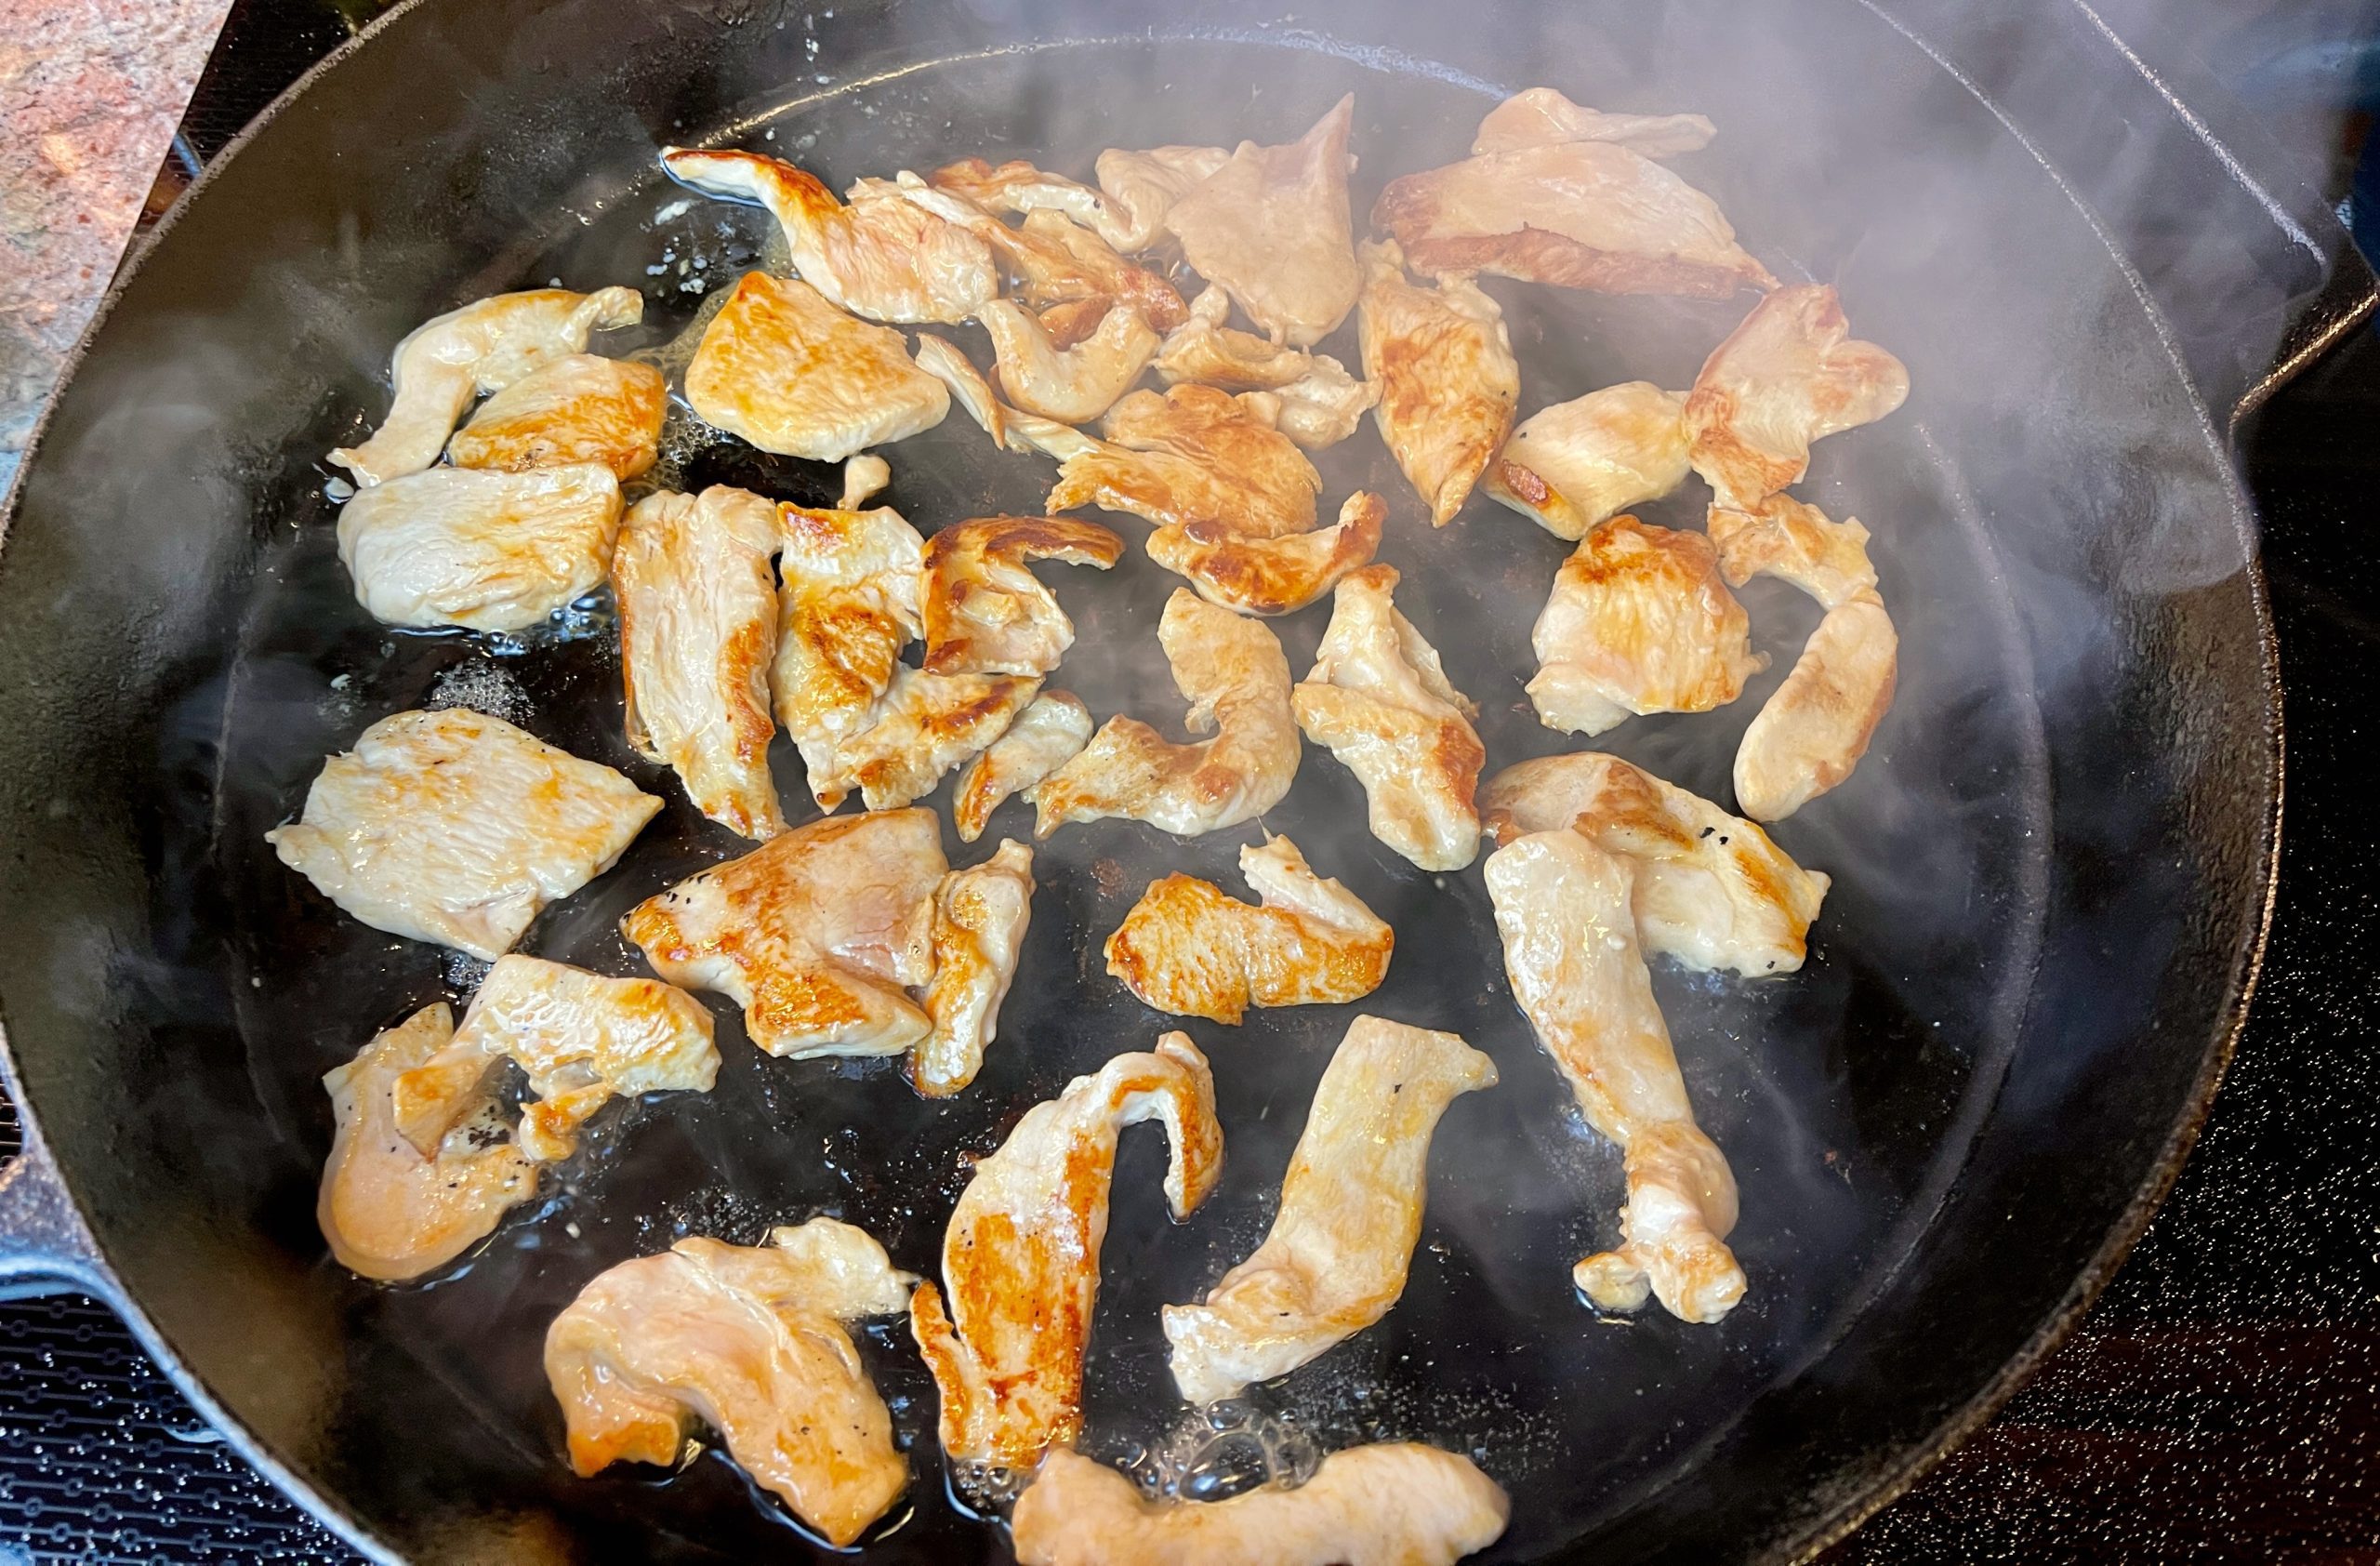 Turn chicken slices over and cook for an additional 1 minute.